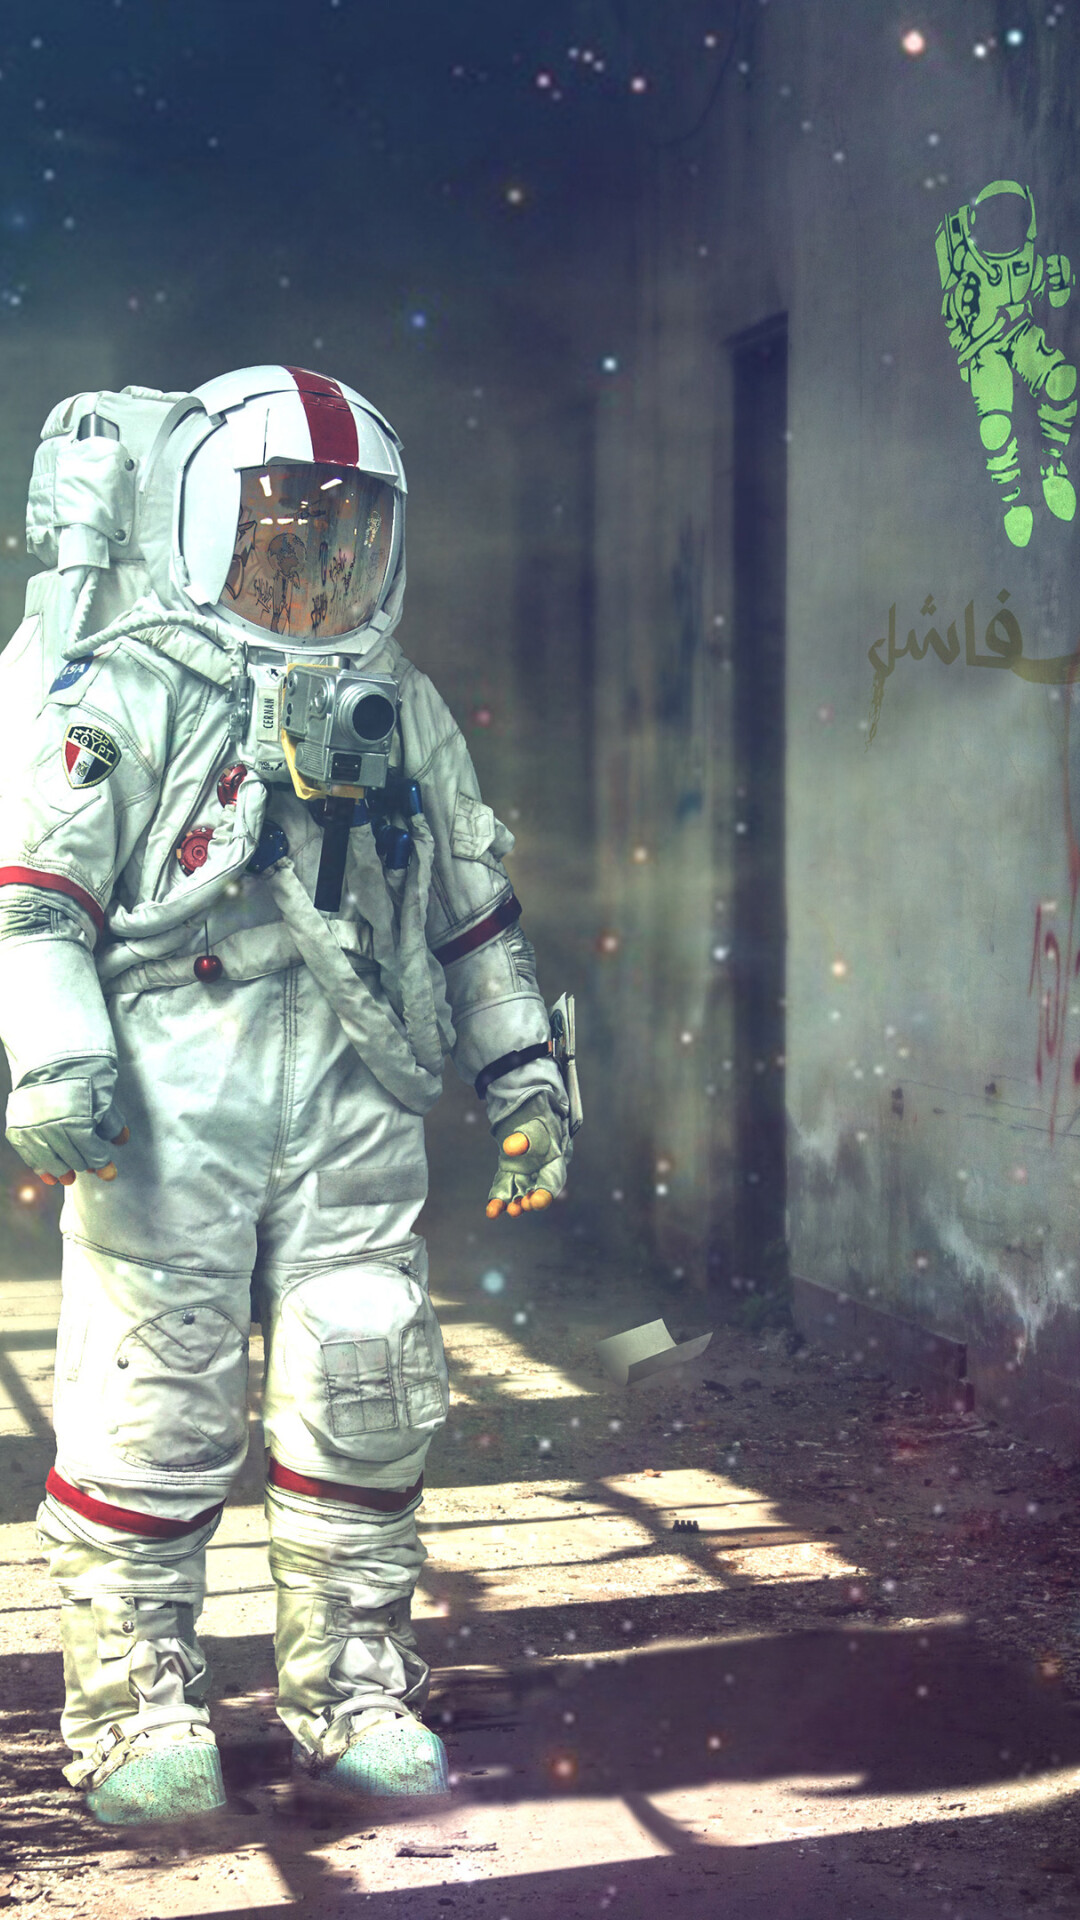 Astronaut: Human space traveler in an abandoned school, Spacesuit. 1080x1920 Full HD Wallpaper.